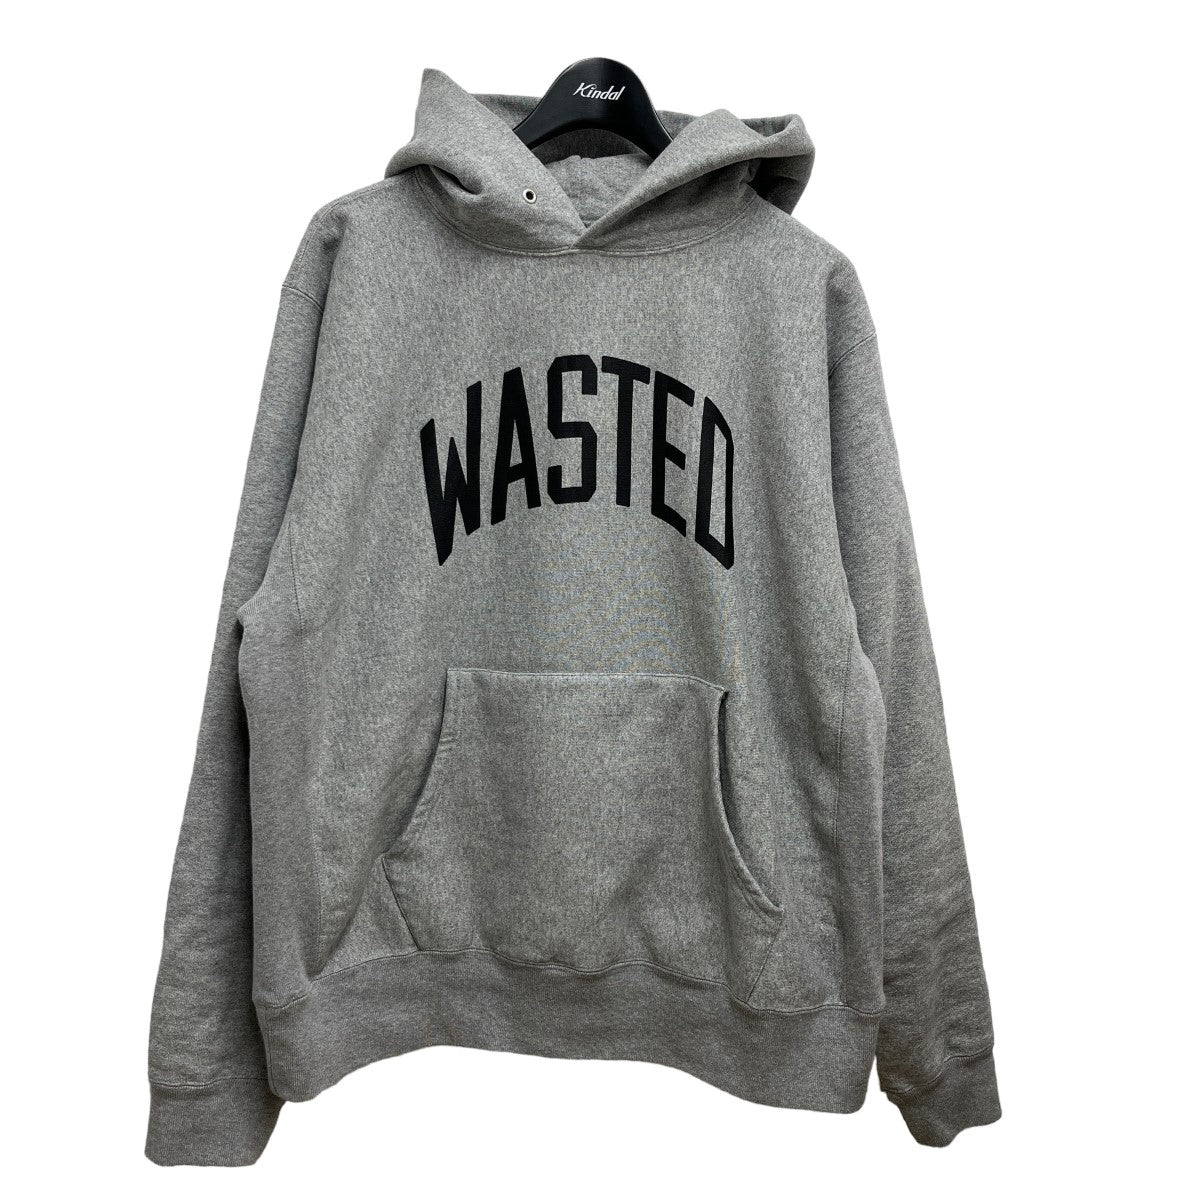 Wasted Youth HEAVY WEIGHT HOODIE - トップス